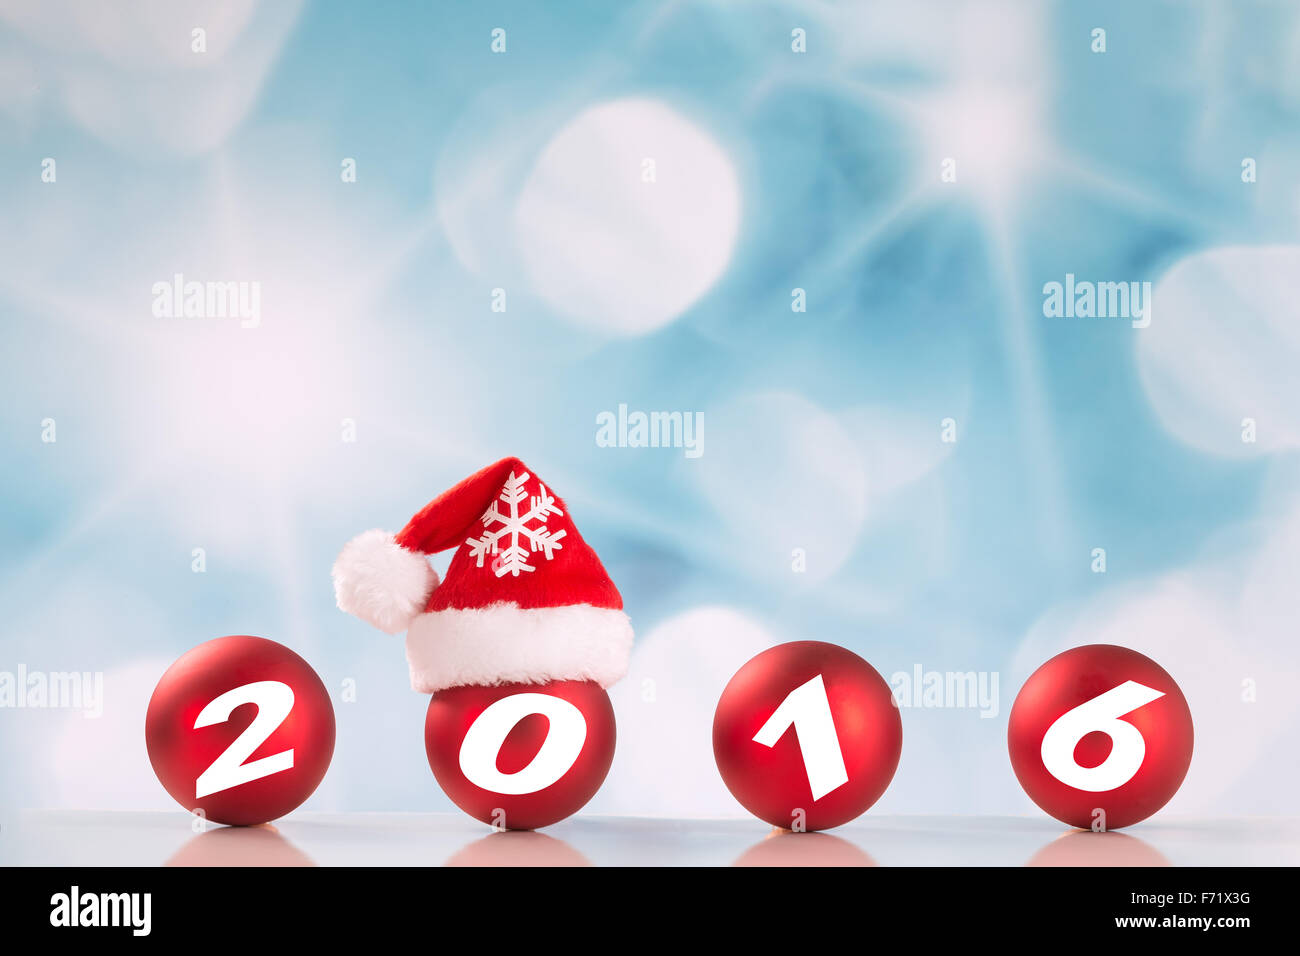 New year 2016 on red balls Stock Photo